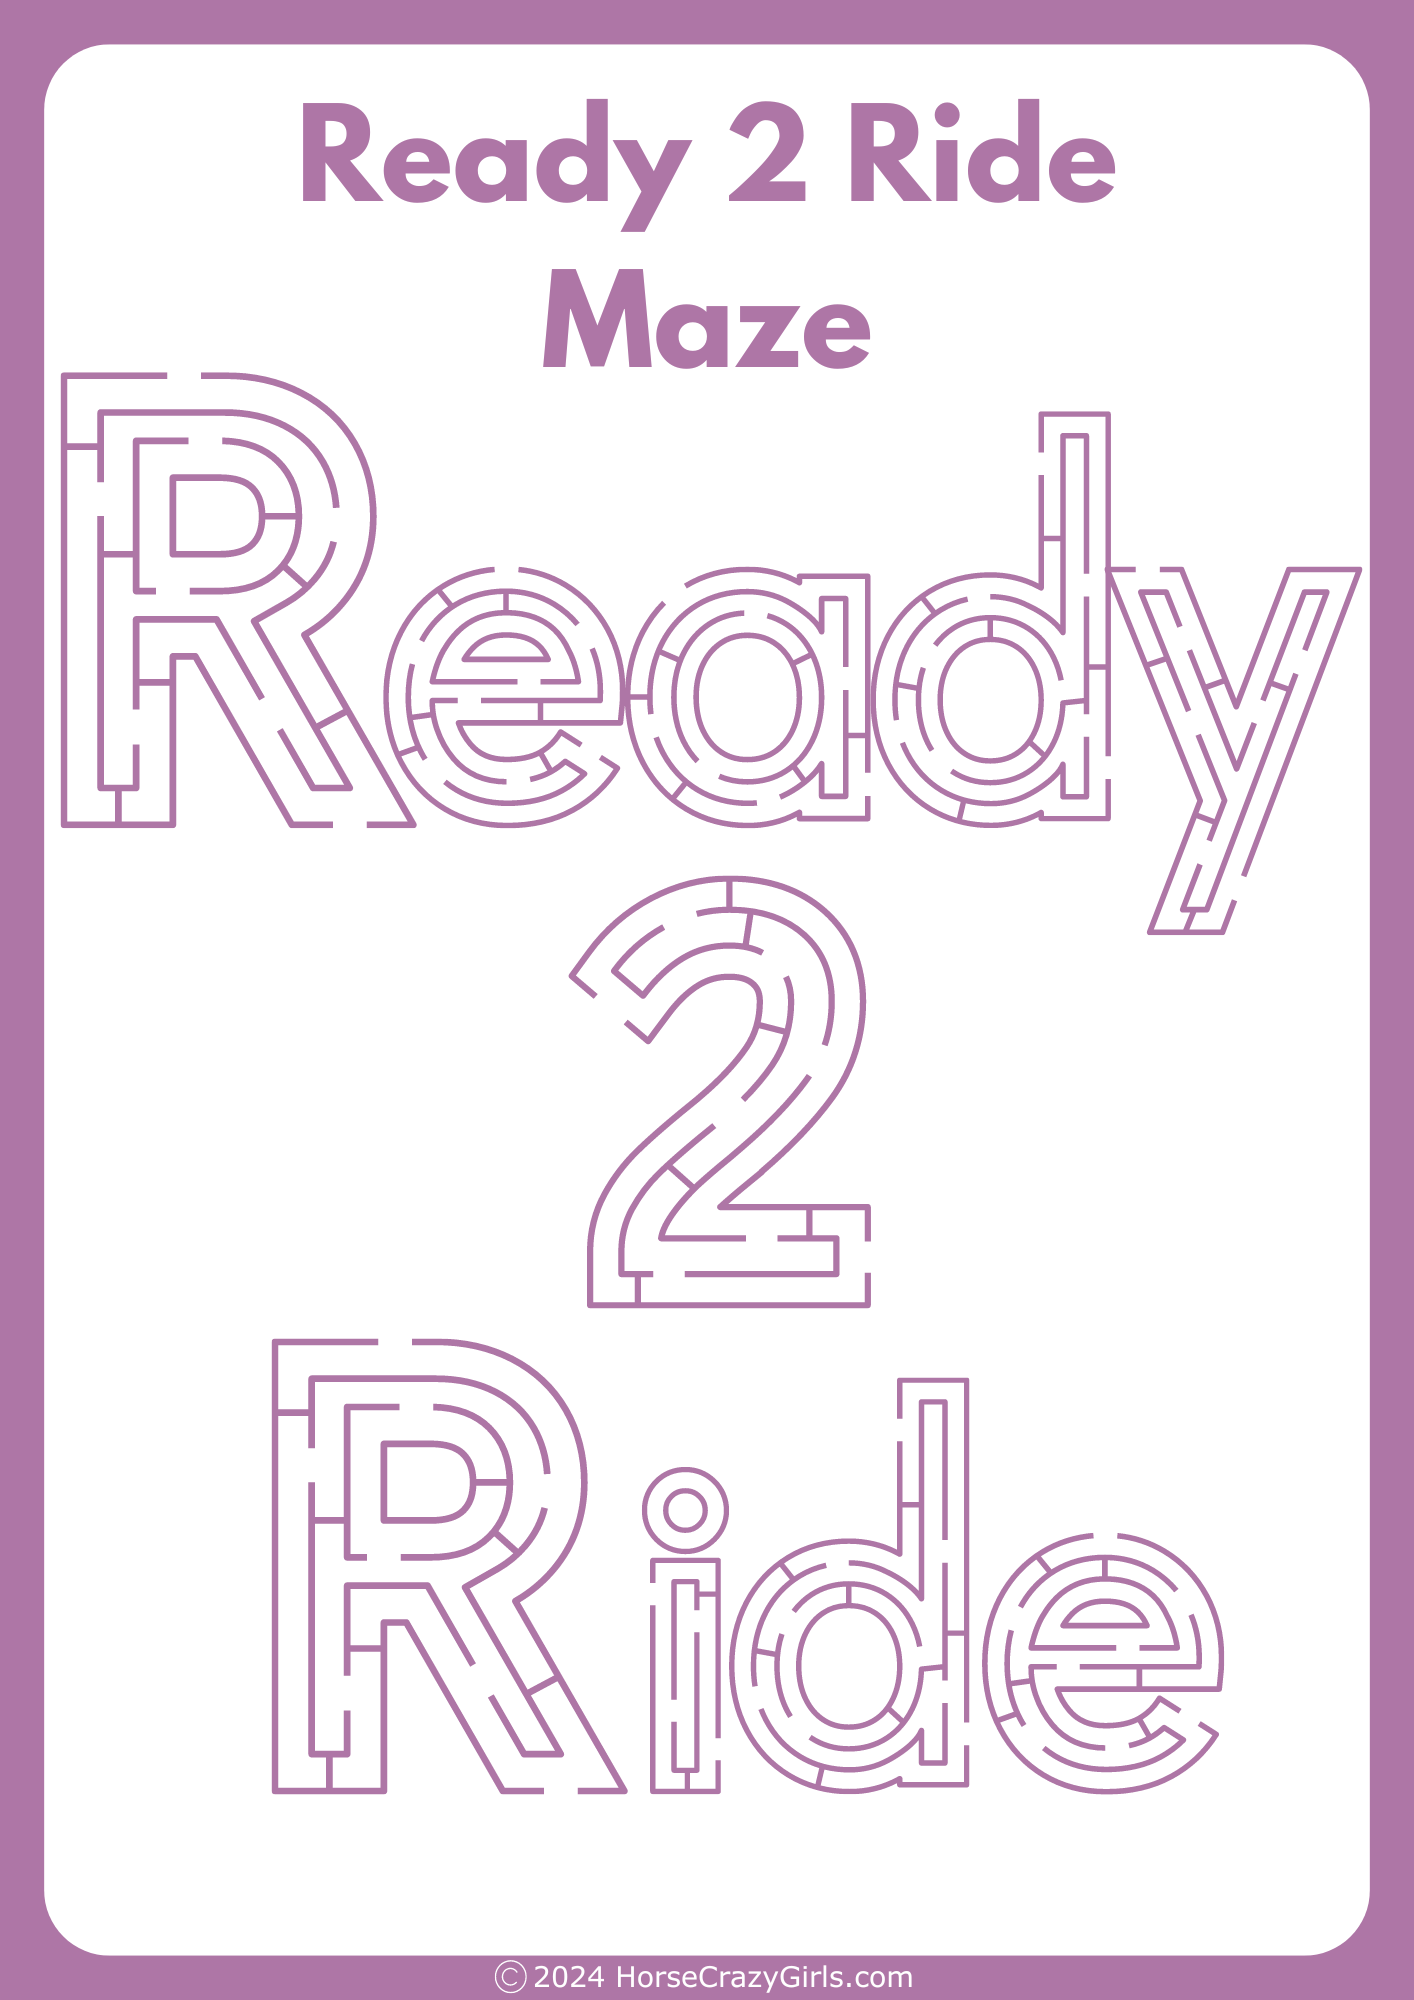 The words ready 2 ride made up with letters that have small mazes in them.